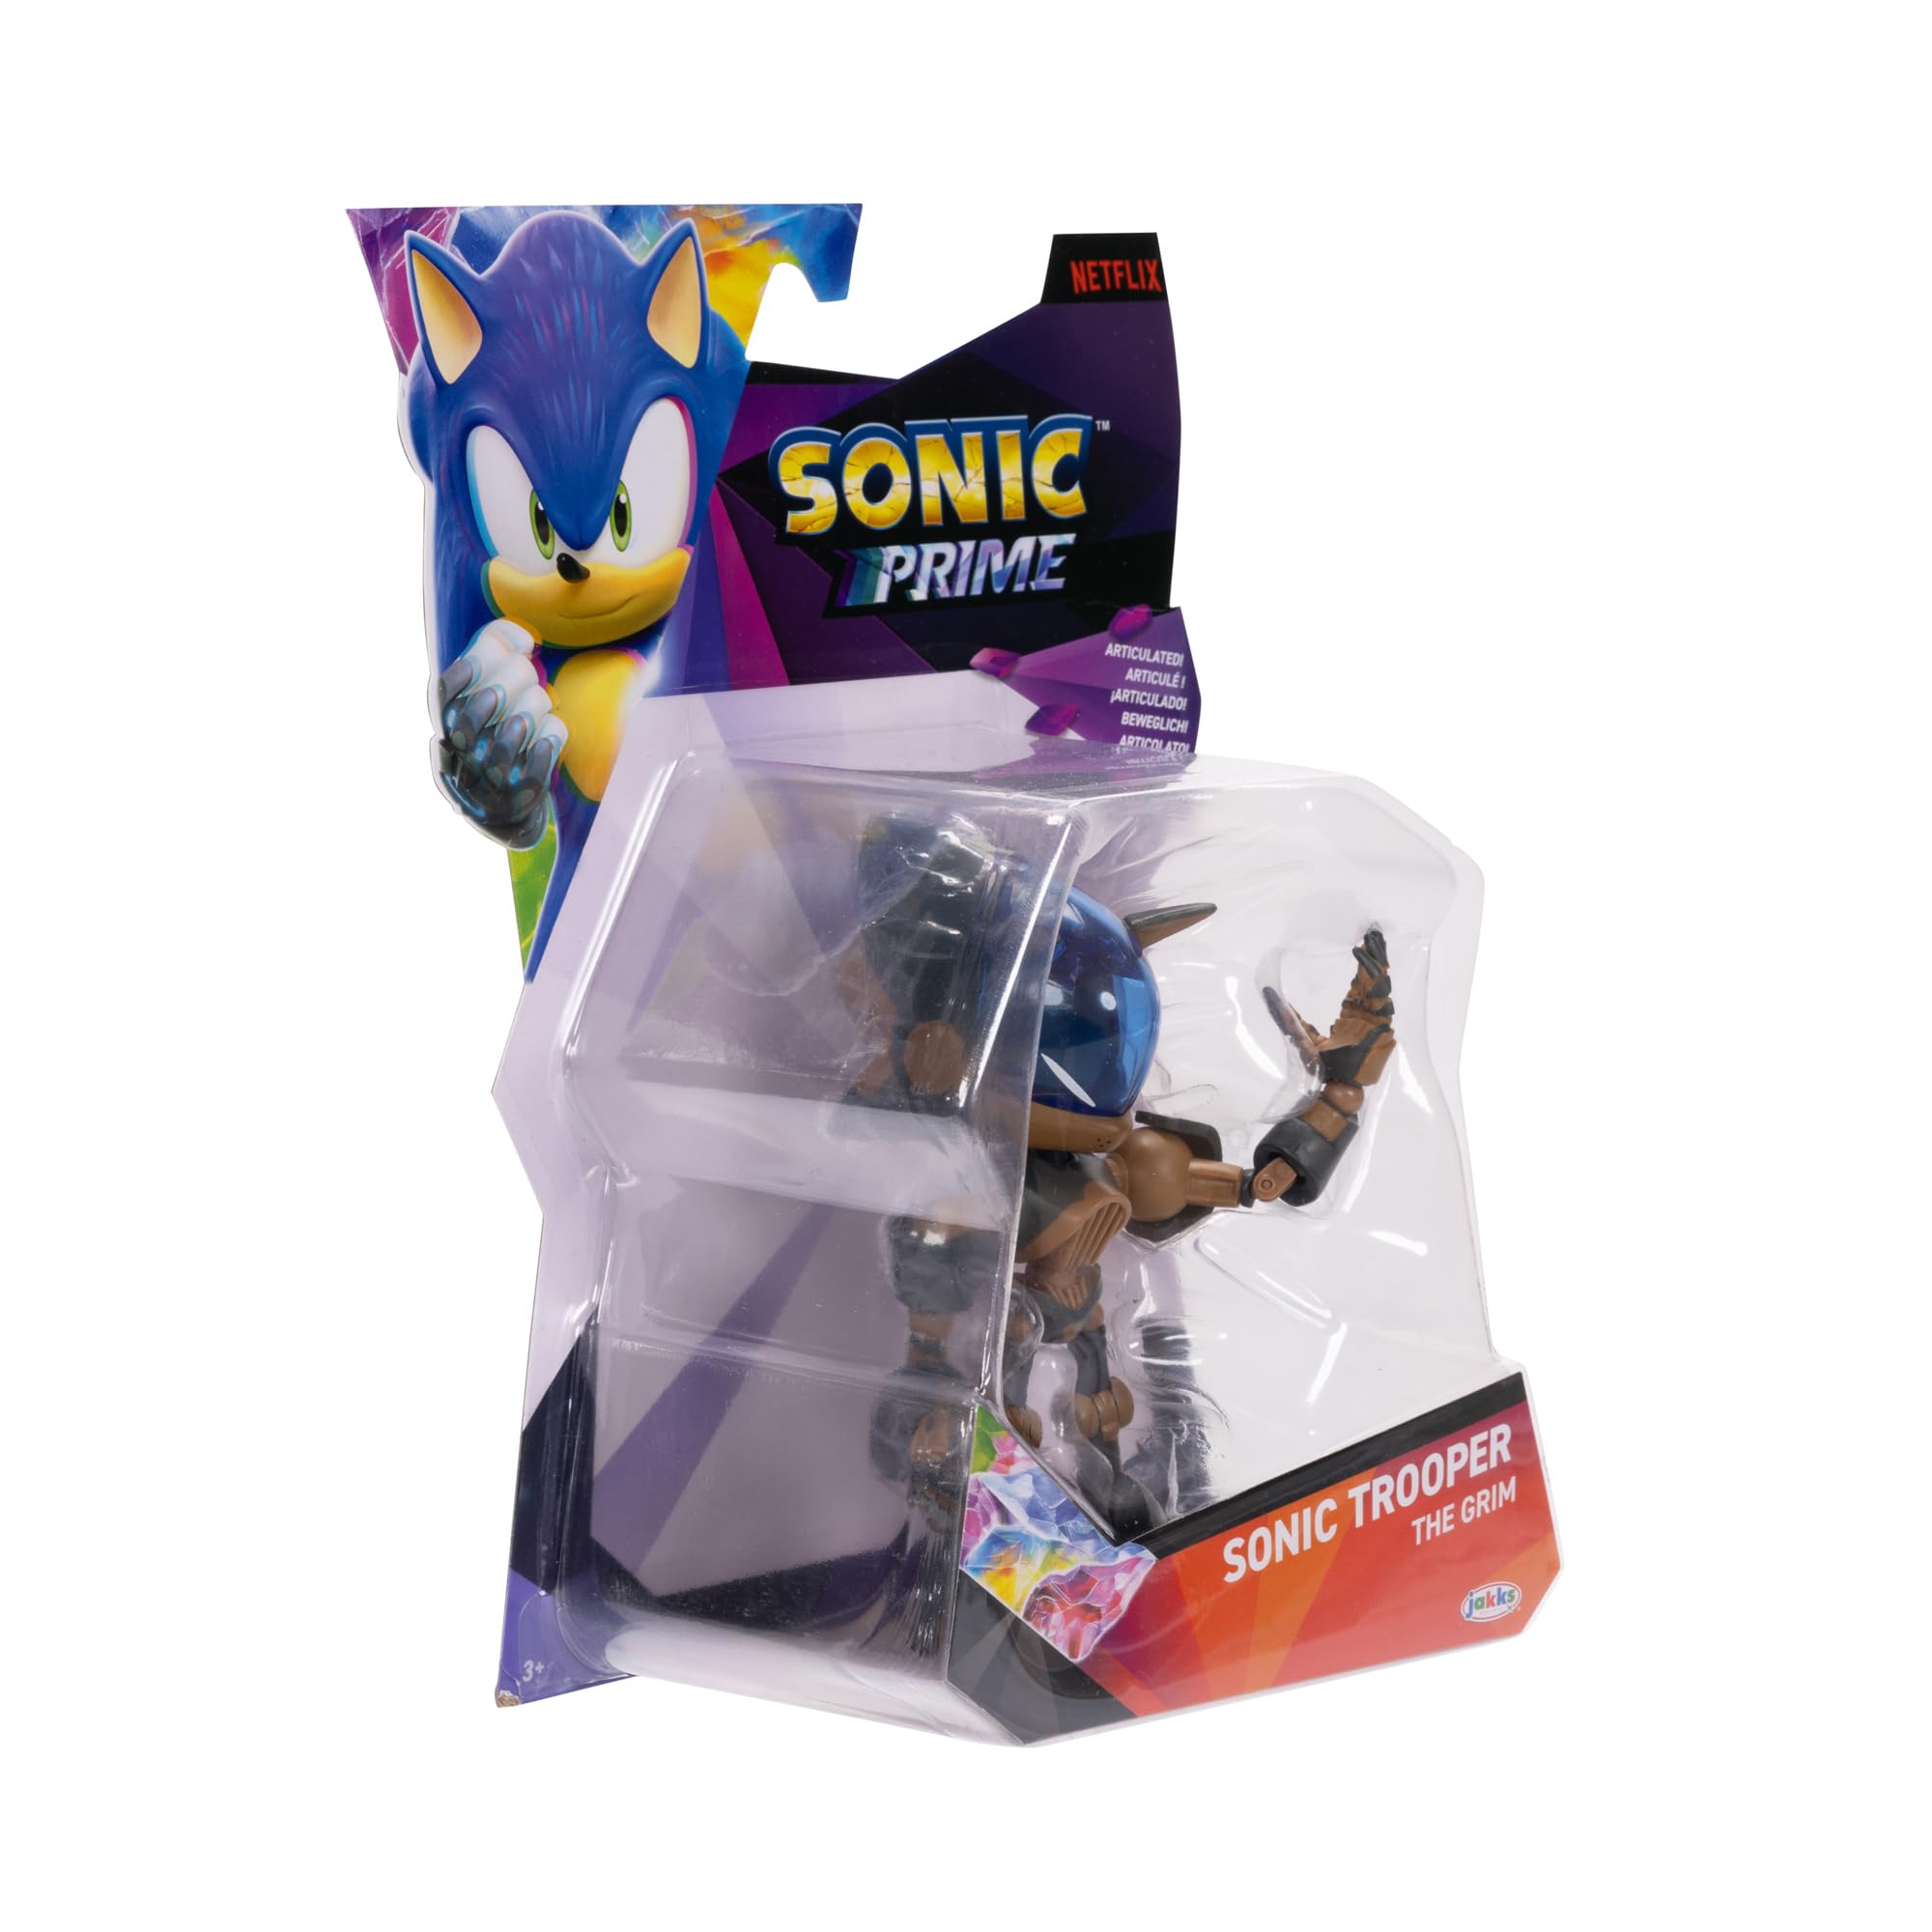 Sonic Prime 5-inch Sonic Trooper - The Grim Action Figure 13 Points of Articulations. Ages 3+ (Officially Licensed by Sega and Netflix)